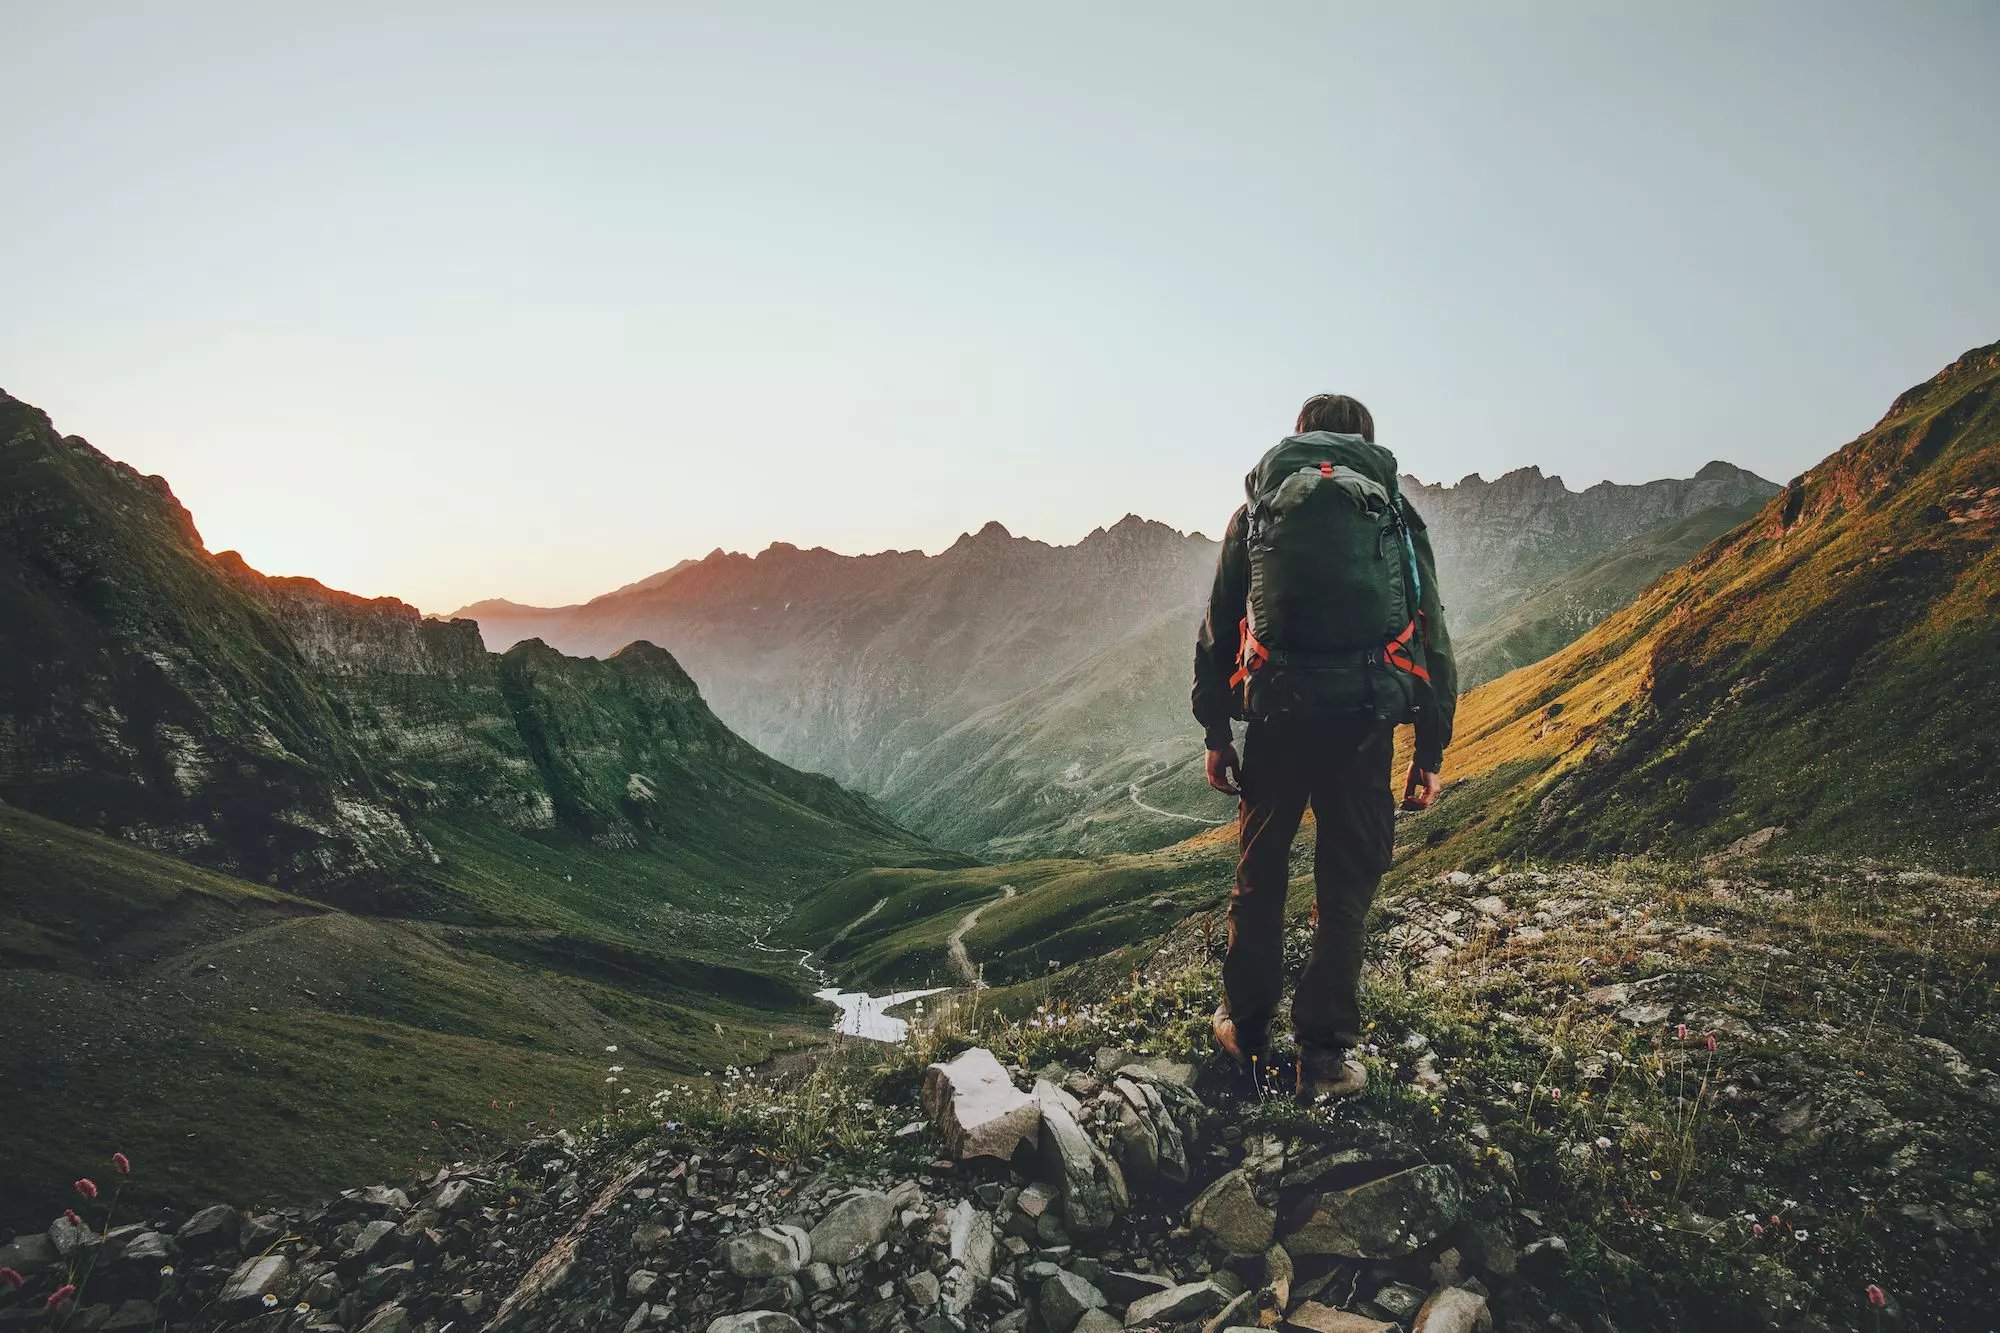 Hiking, Trekking, Mountaineering - What's the difference?